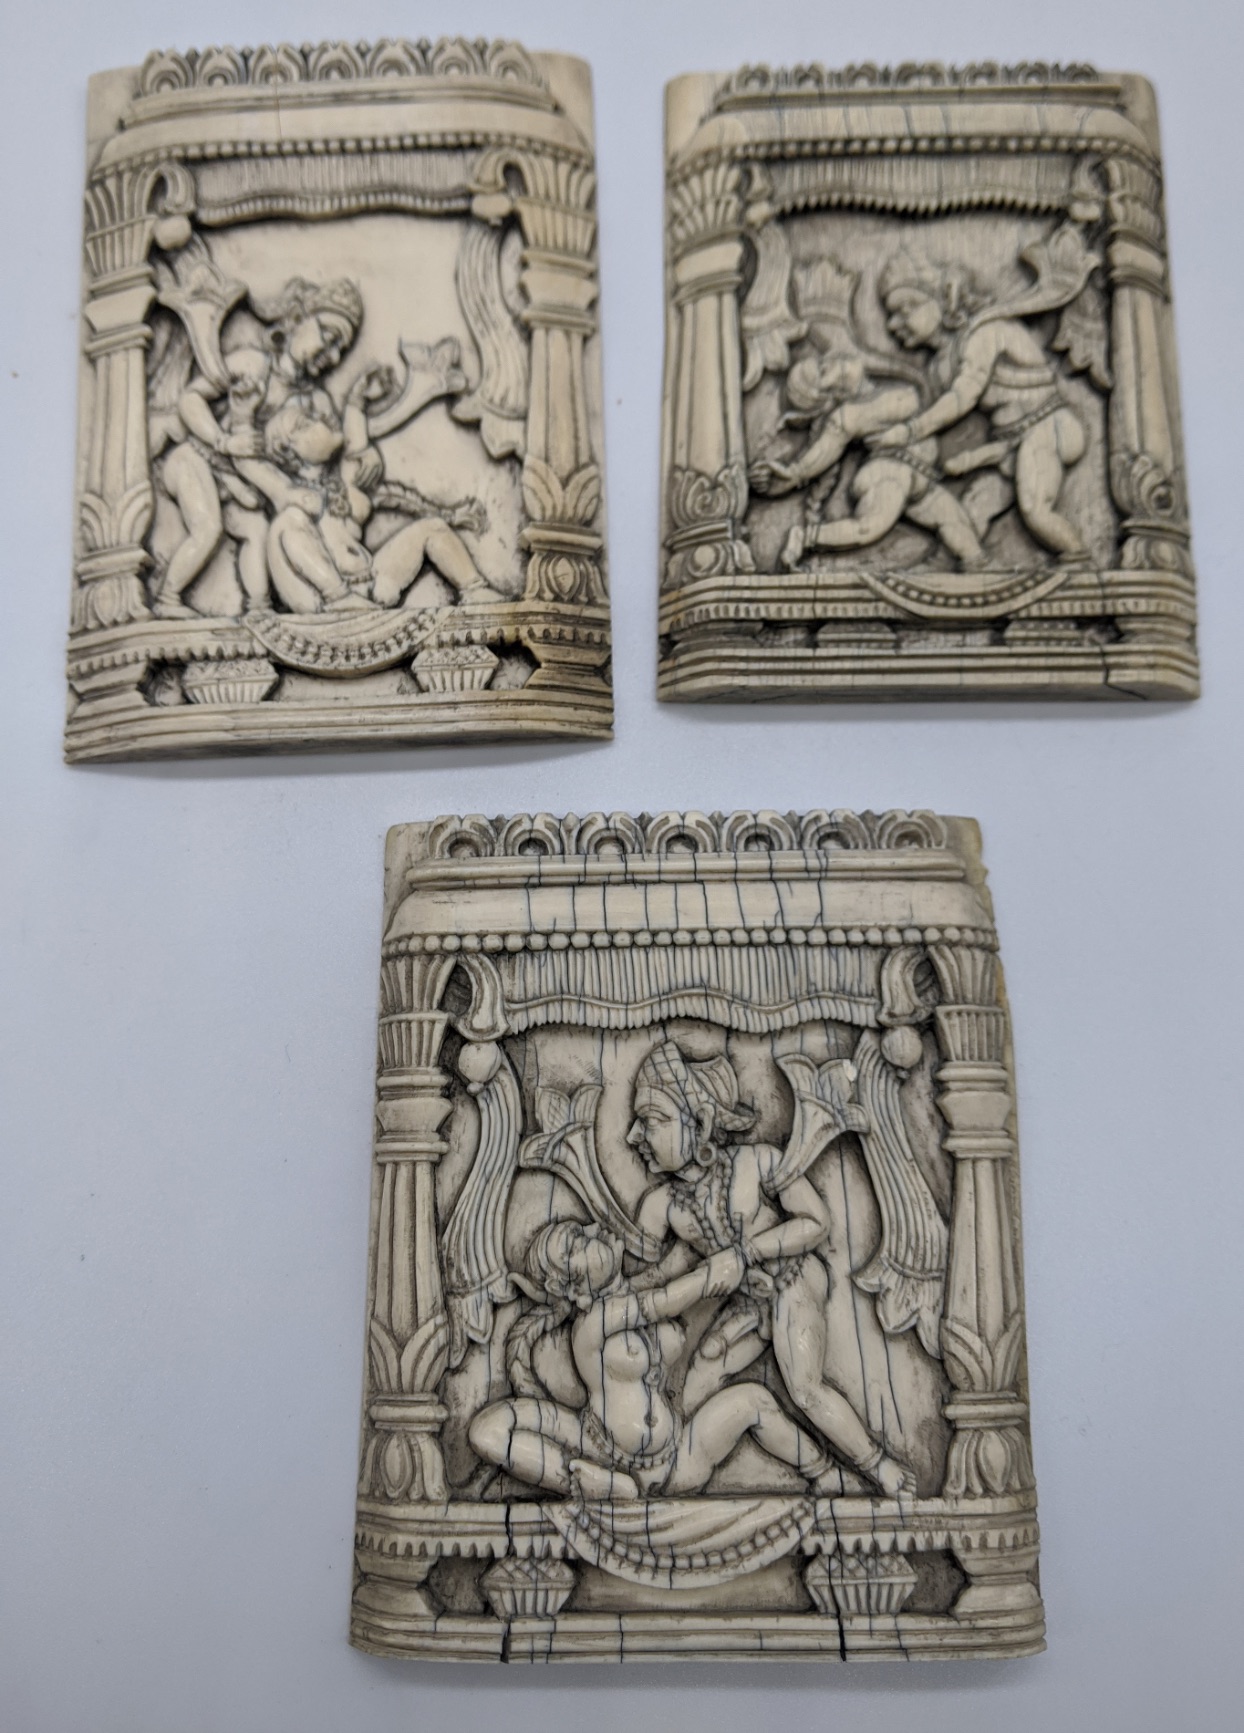 Three 19th century Indian ivory plaques featuring erotic Kamasutra scenes, Rajasthan, Indian, H.10cm - Image 2 of 2